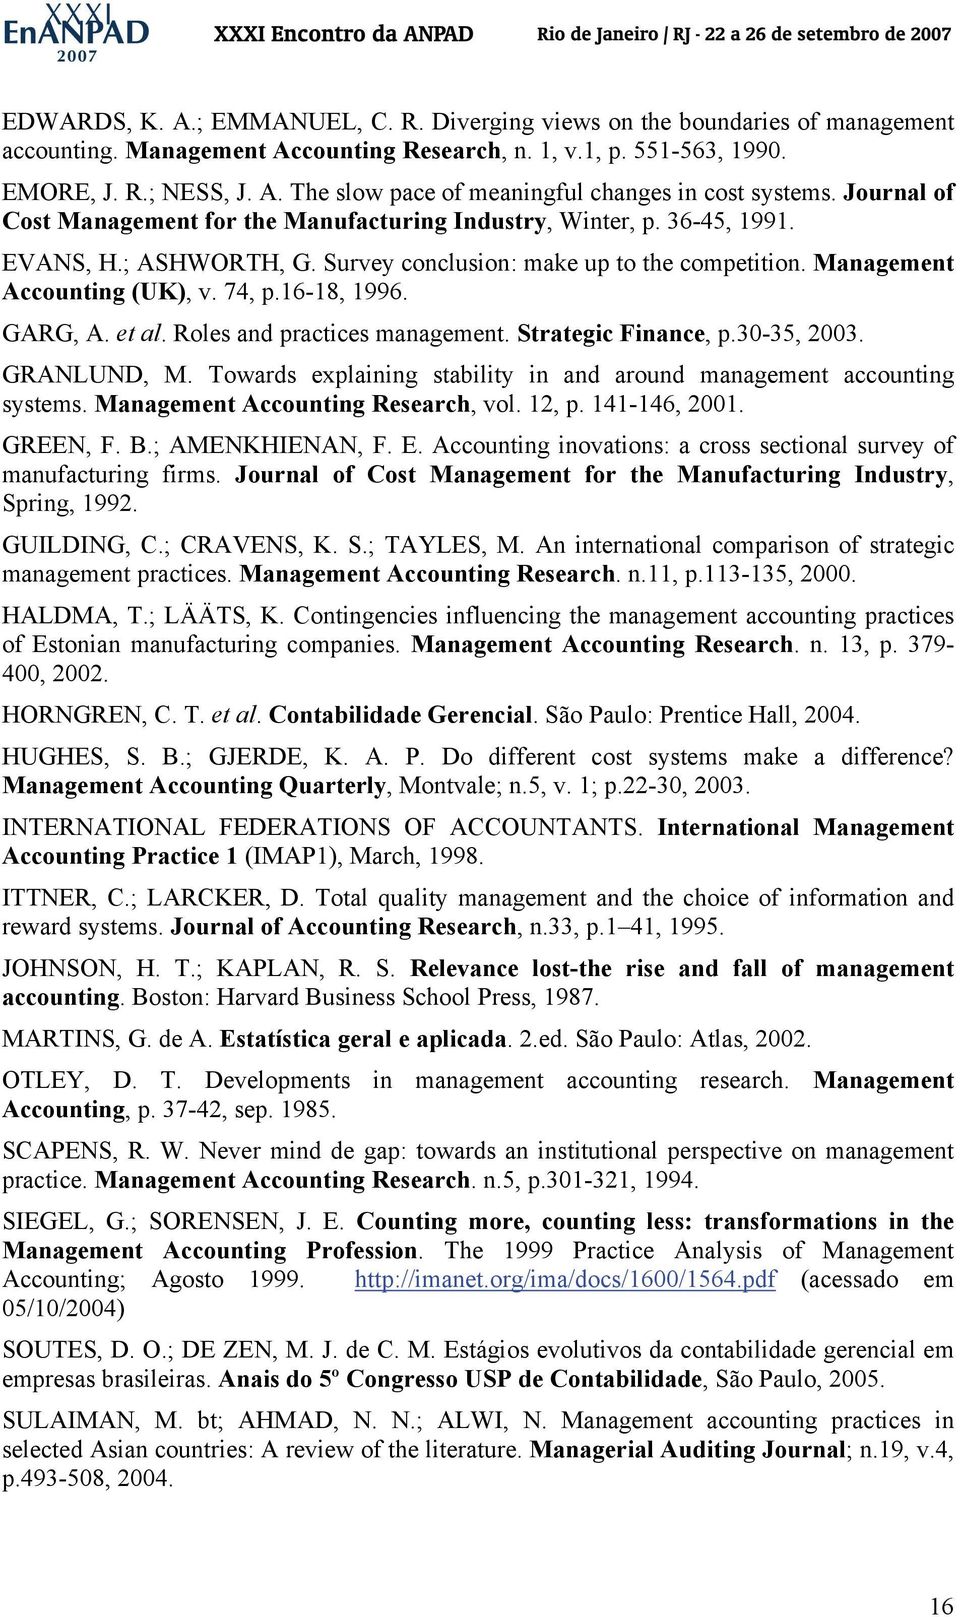 16-18, 1996. GARG, A. et al. Roles and practices management. Strategic Finance, p.30-35, 2003. GRANLUND, M. Towards explaining stability in and around management accounting systems.